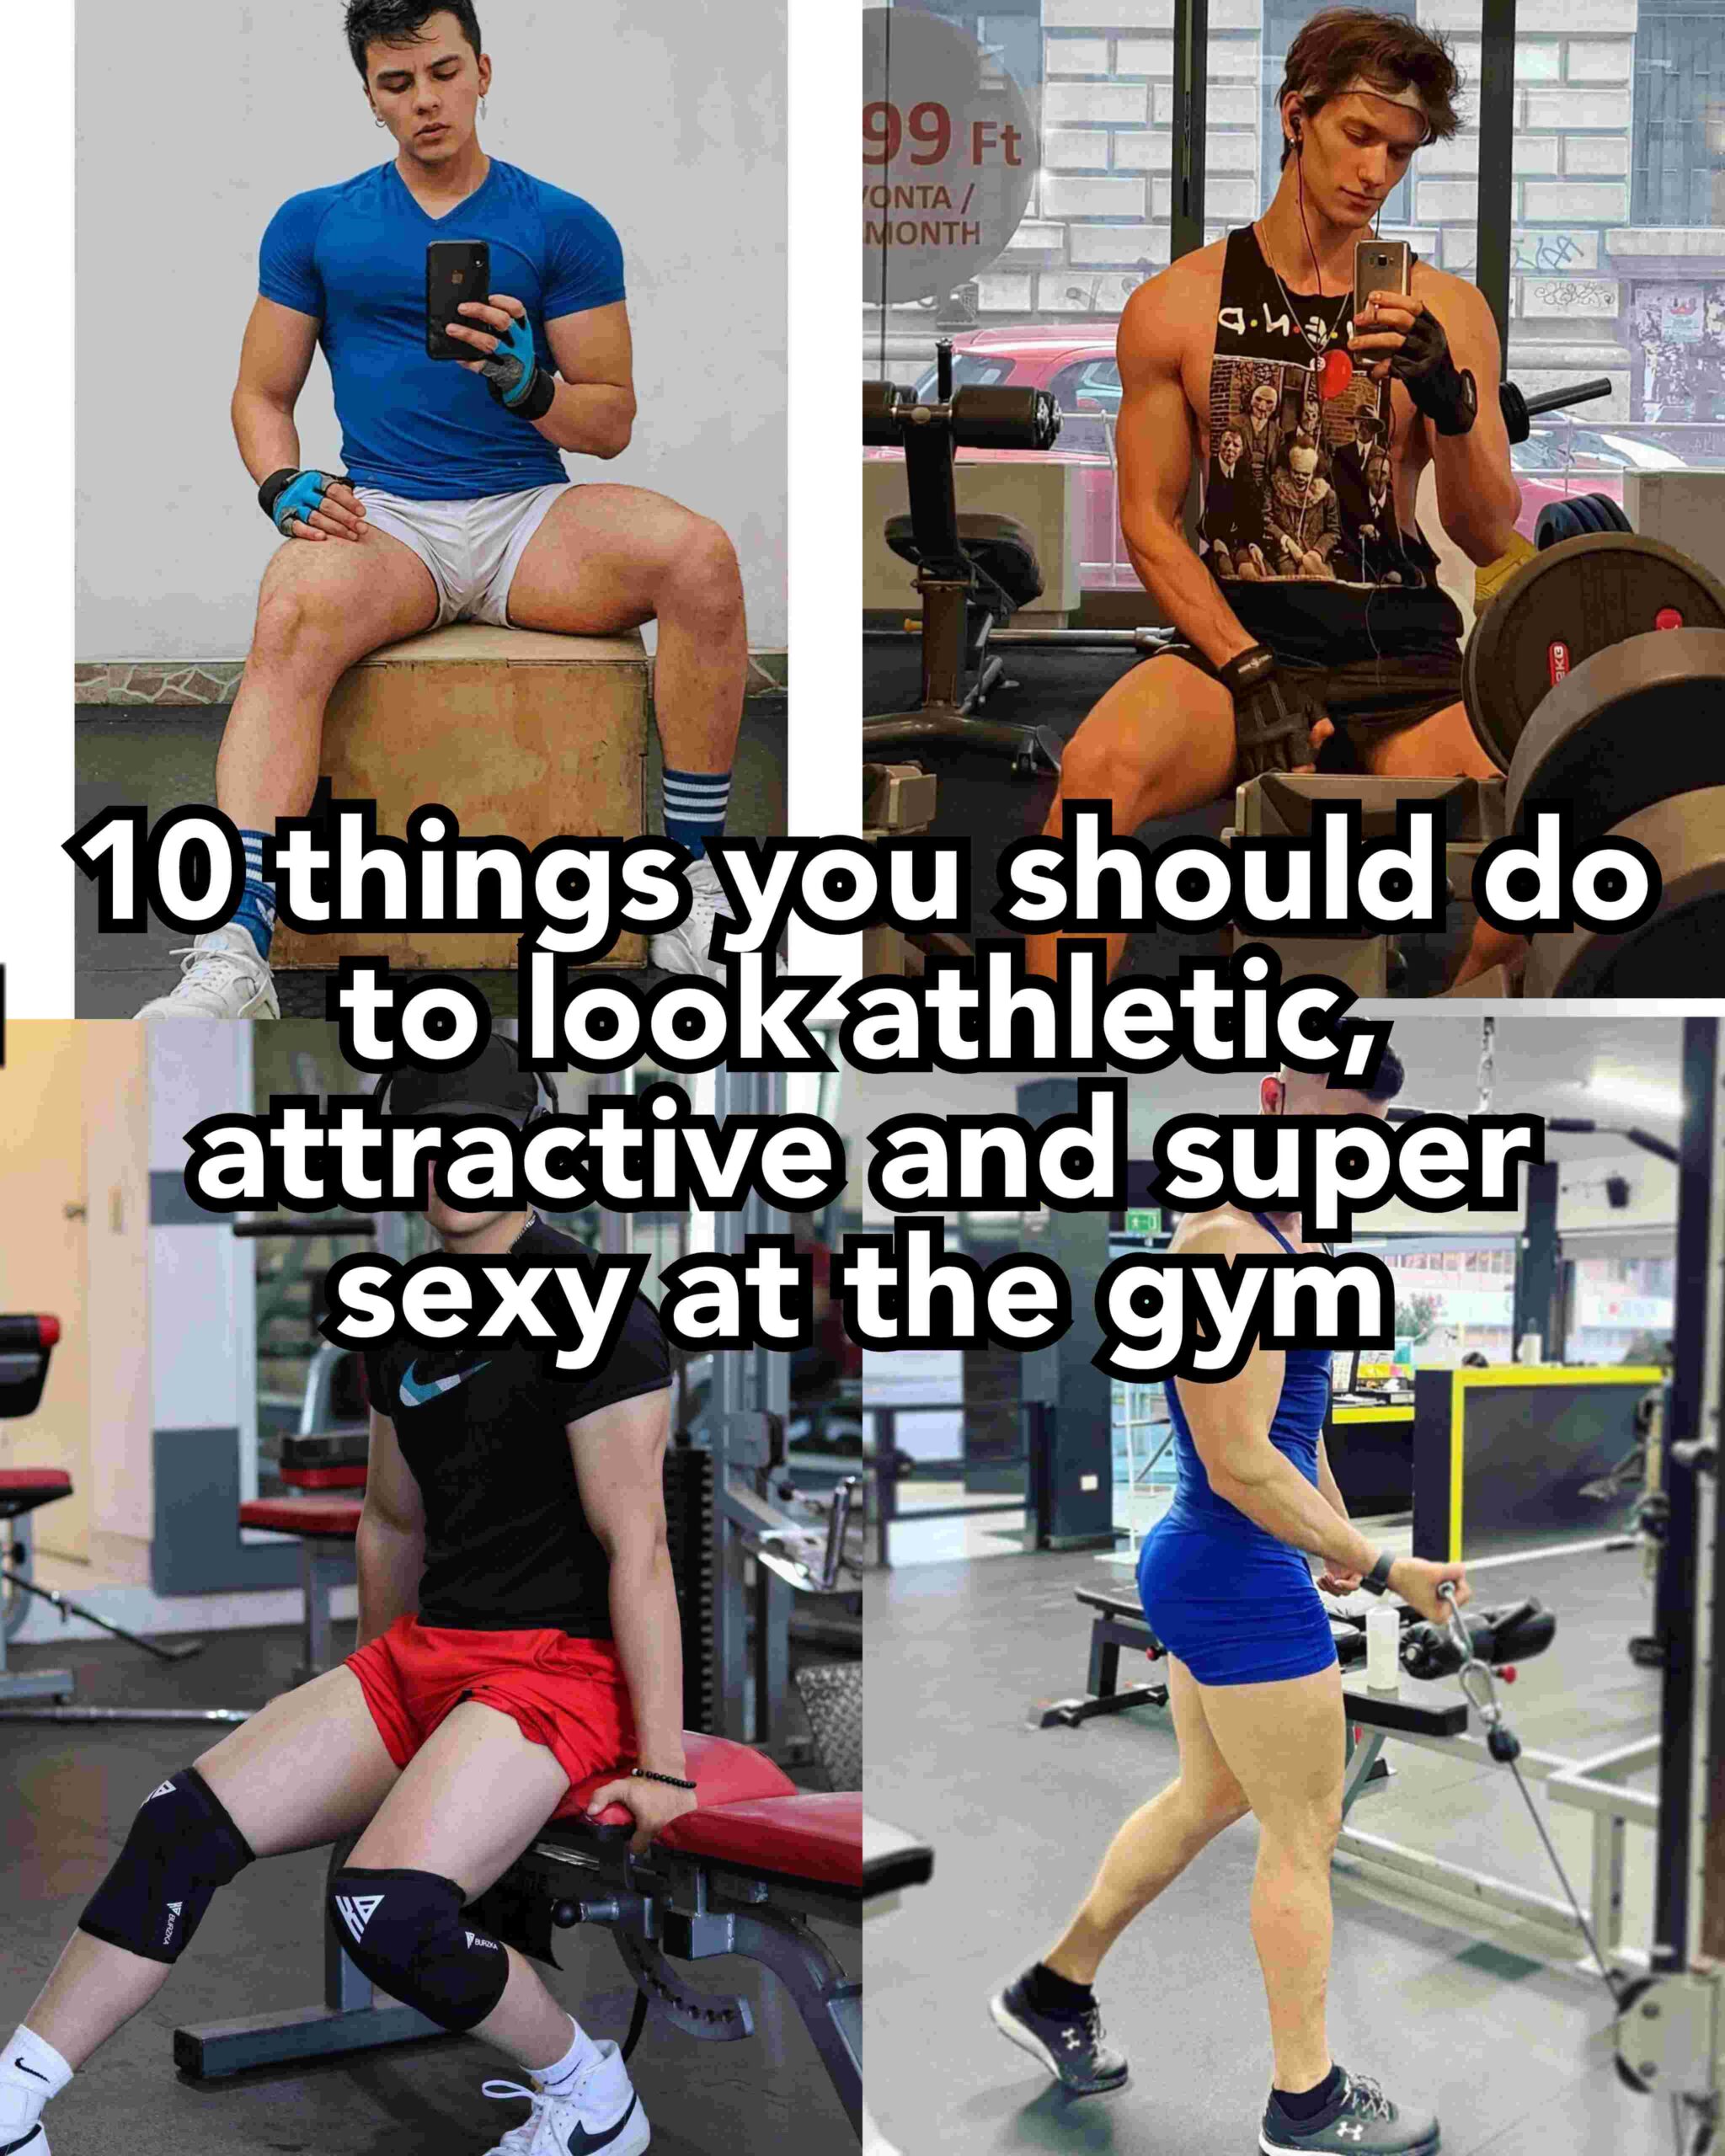 How can I look attractive at the gym.